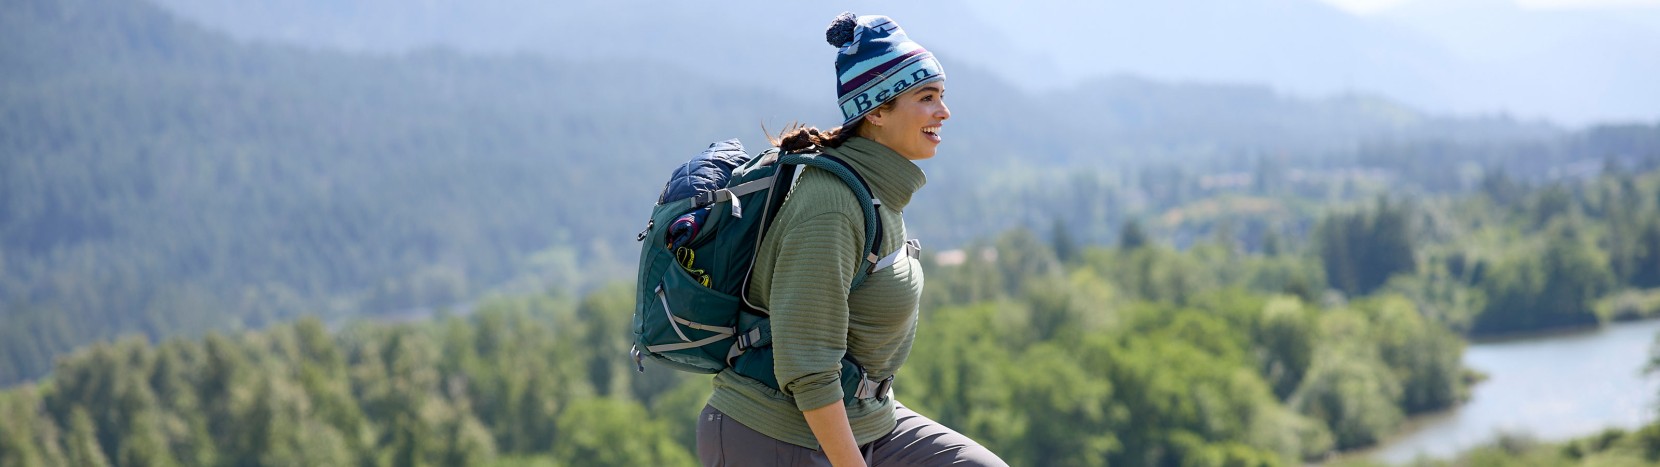 https://www.llbean.net/firstspirit/media/image_library/2023/category_banners_3/231009_plus_size_camping___hiking_gear/518833_Banner_XLarge.jpg